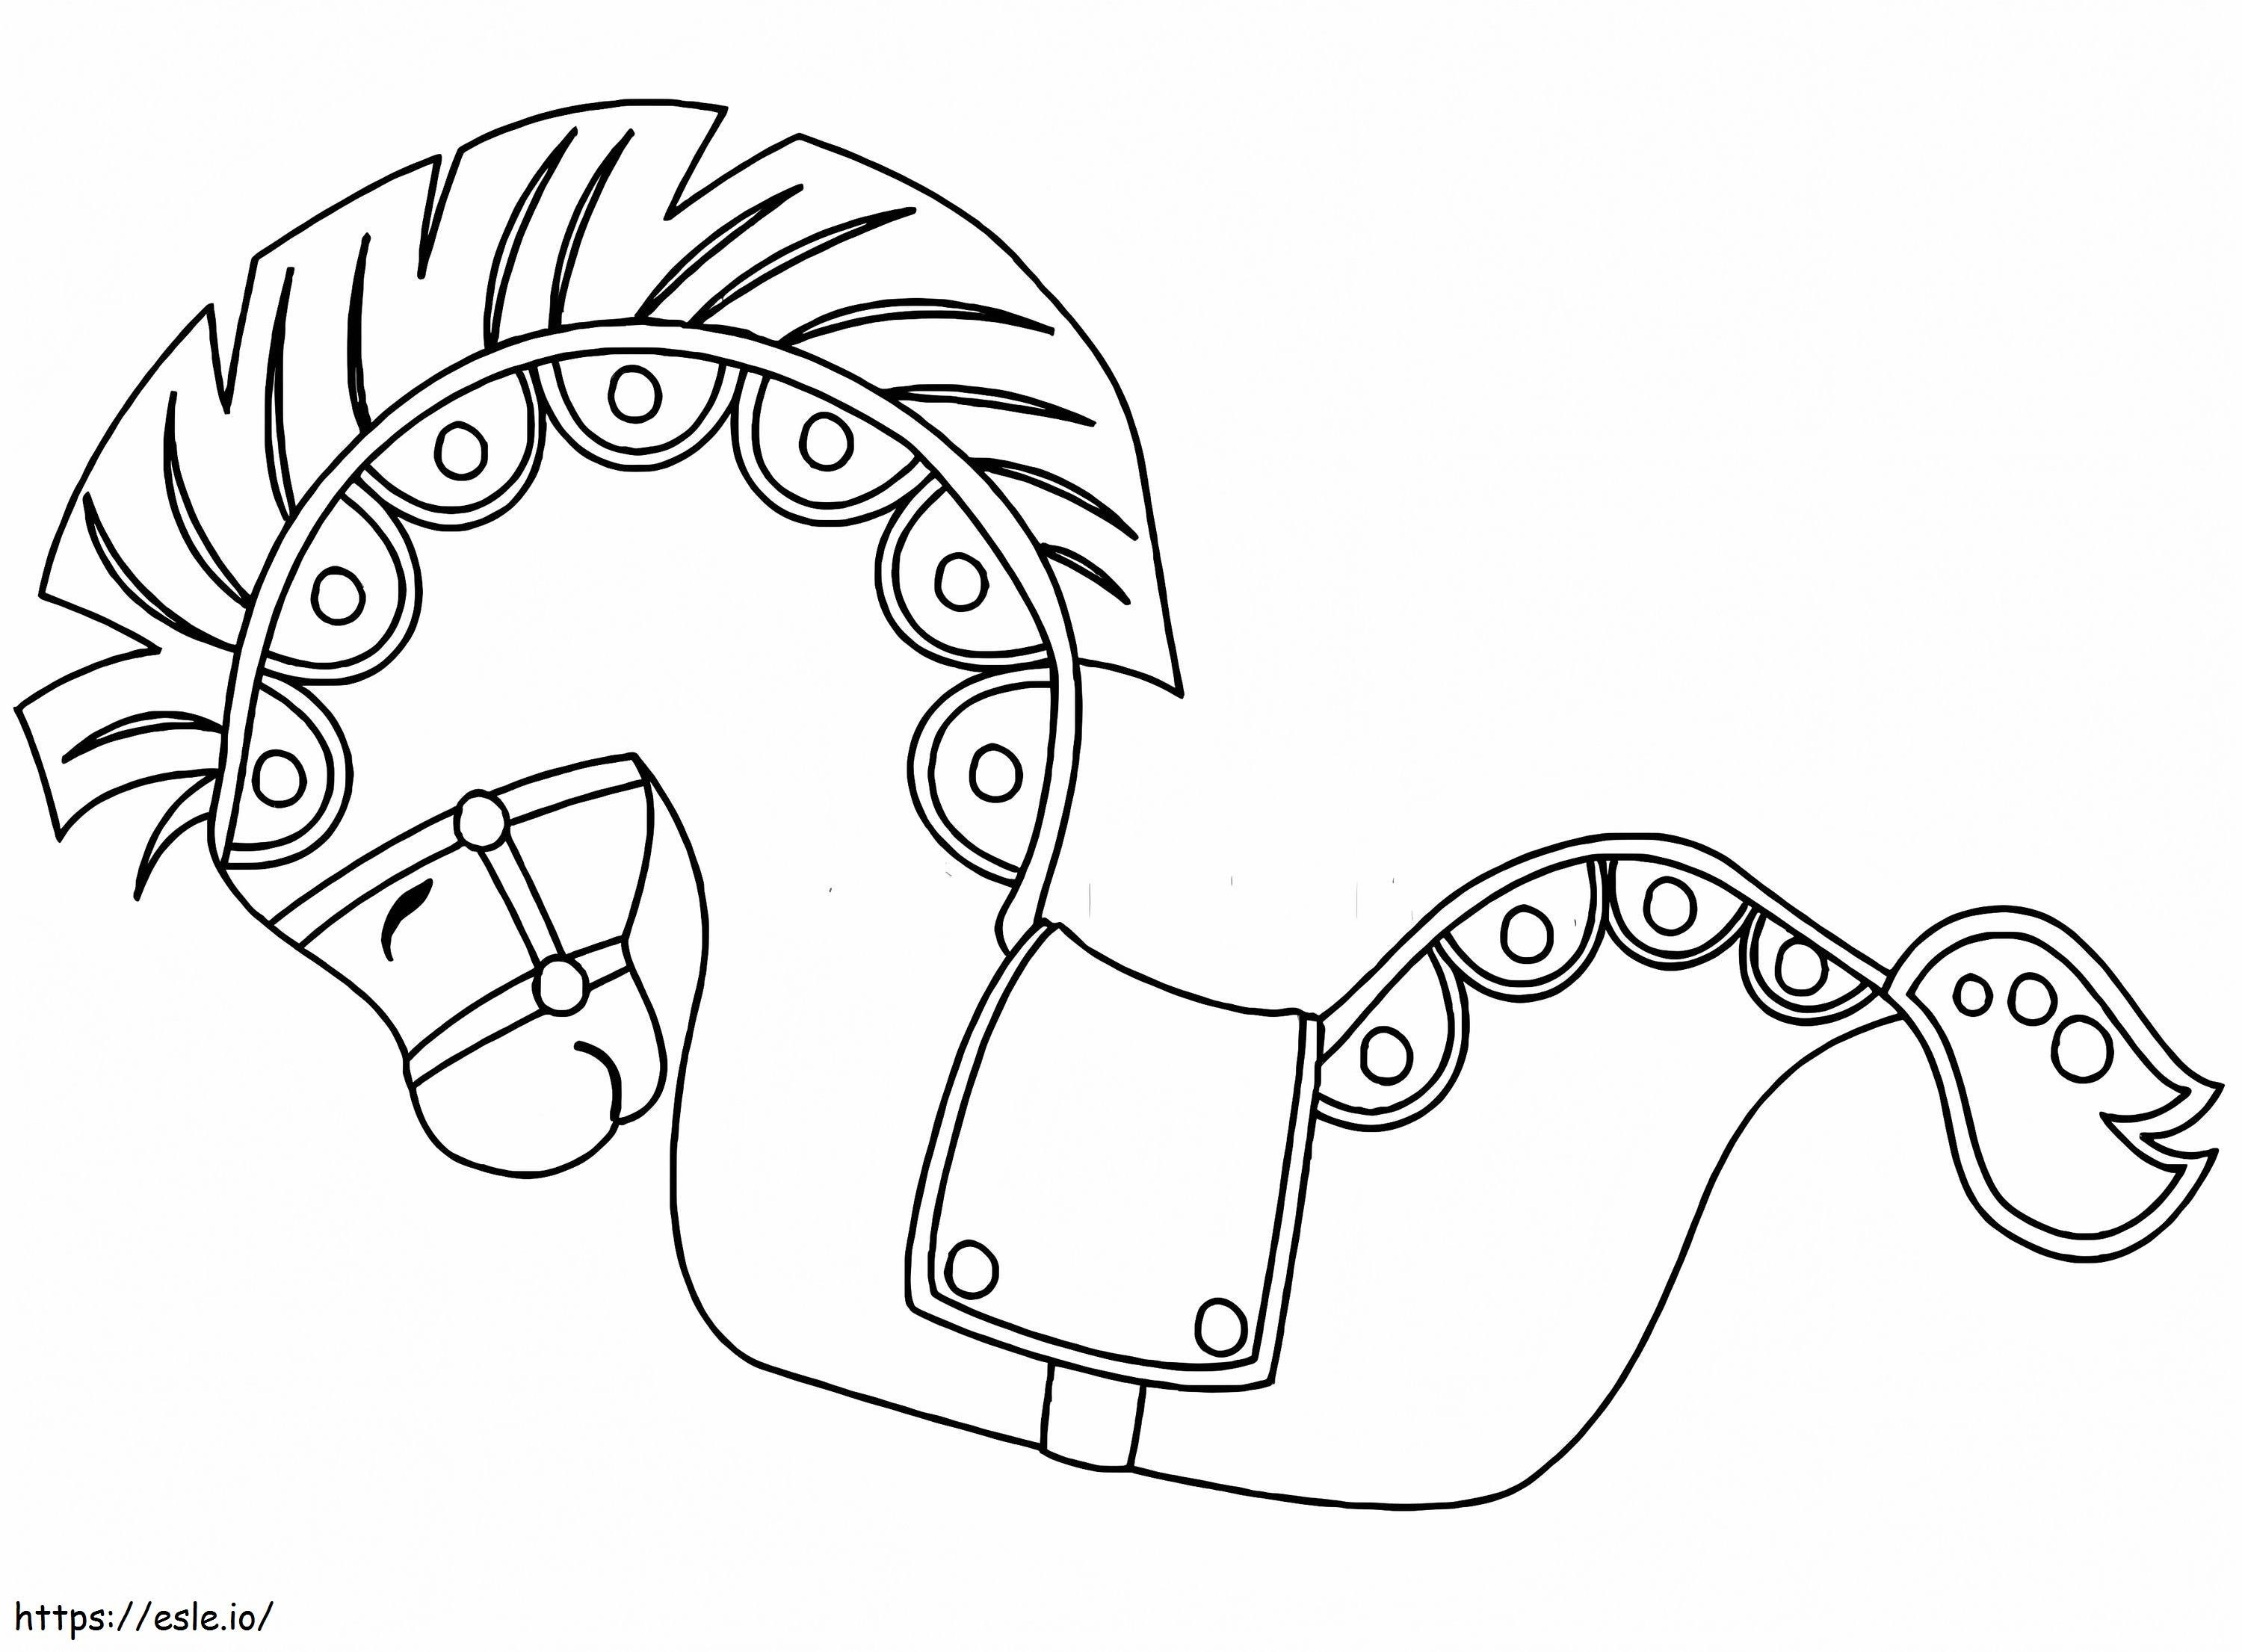 Lumping Horse coloring page